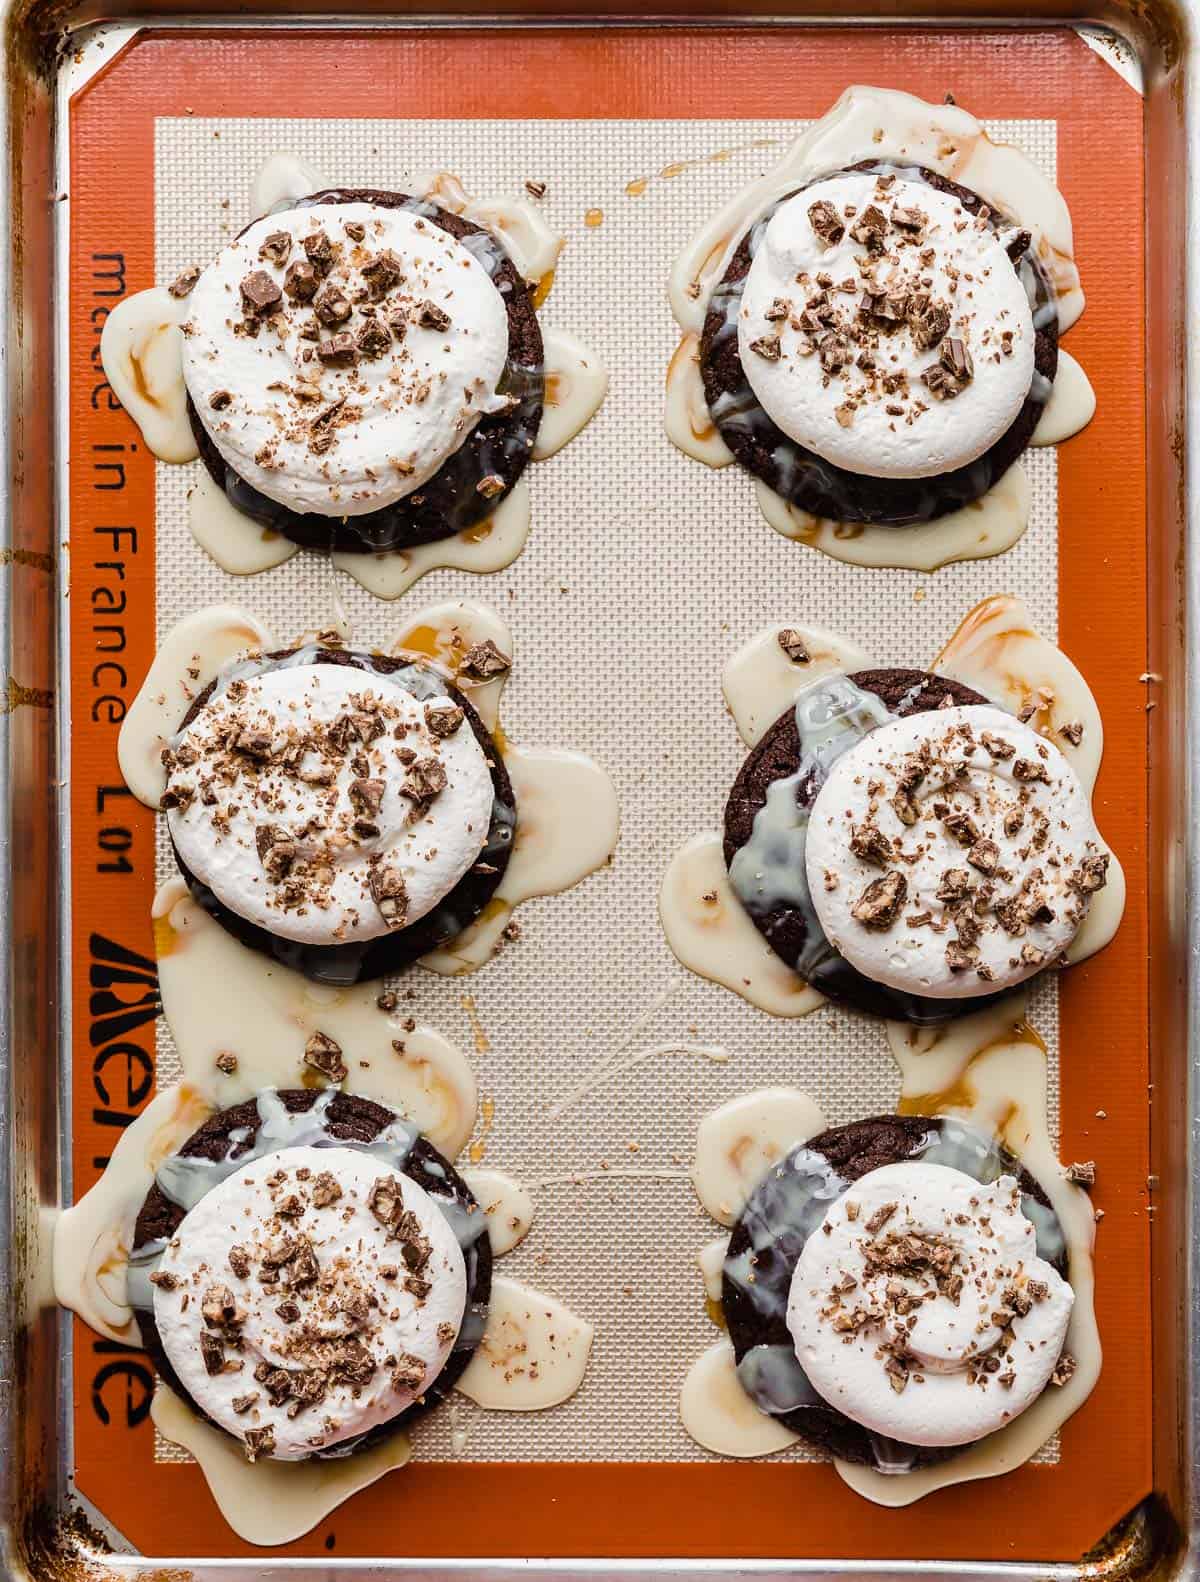 Chocolate cookies drizzled with caramel and sweetened condensed milk and topped with whipped cream and Heath.